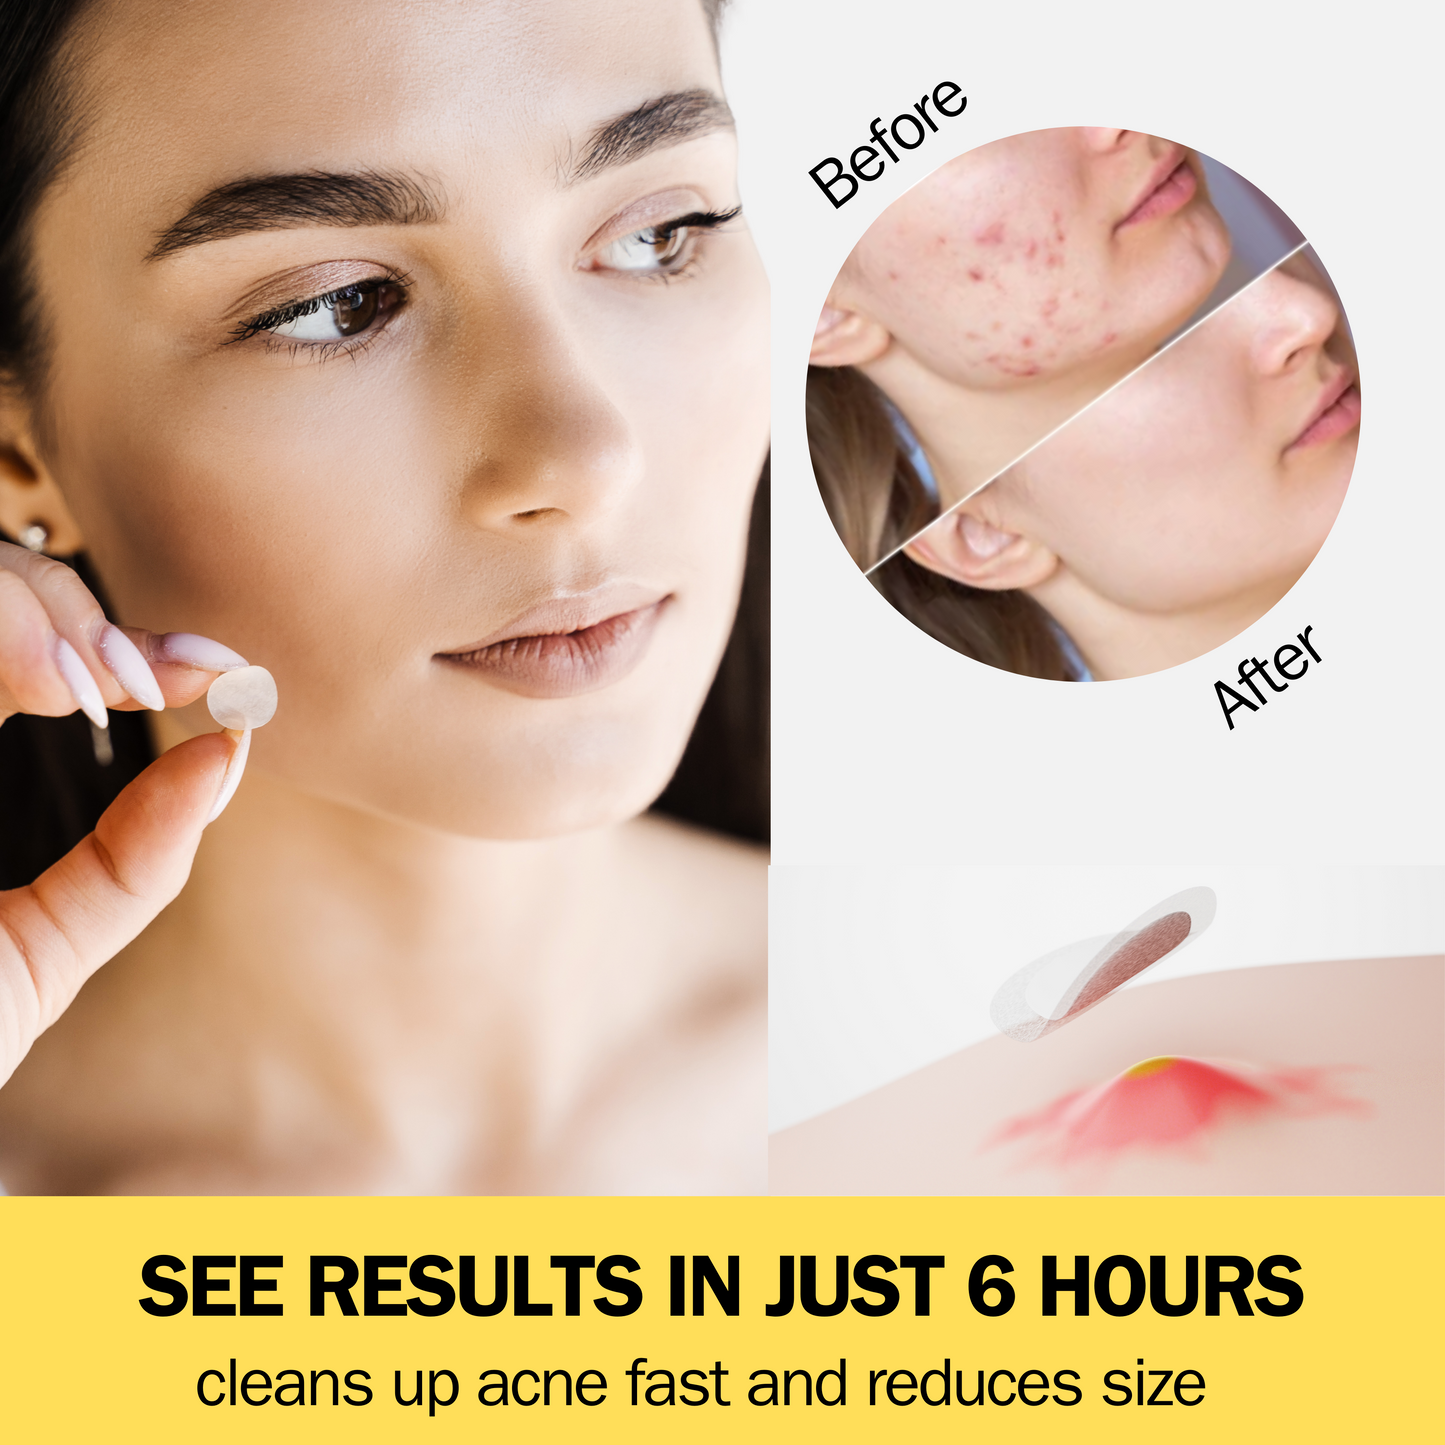 Fast acting! See results in just 6 hours!